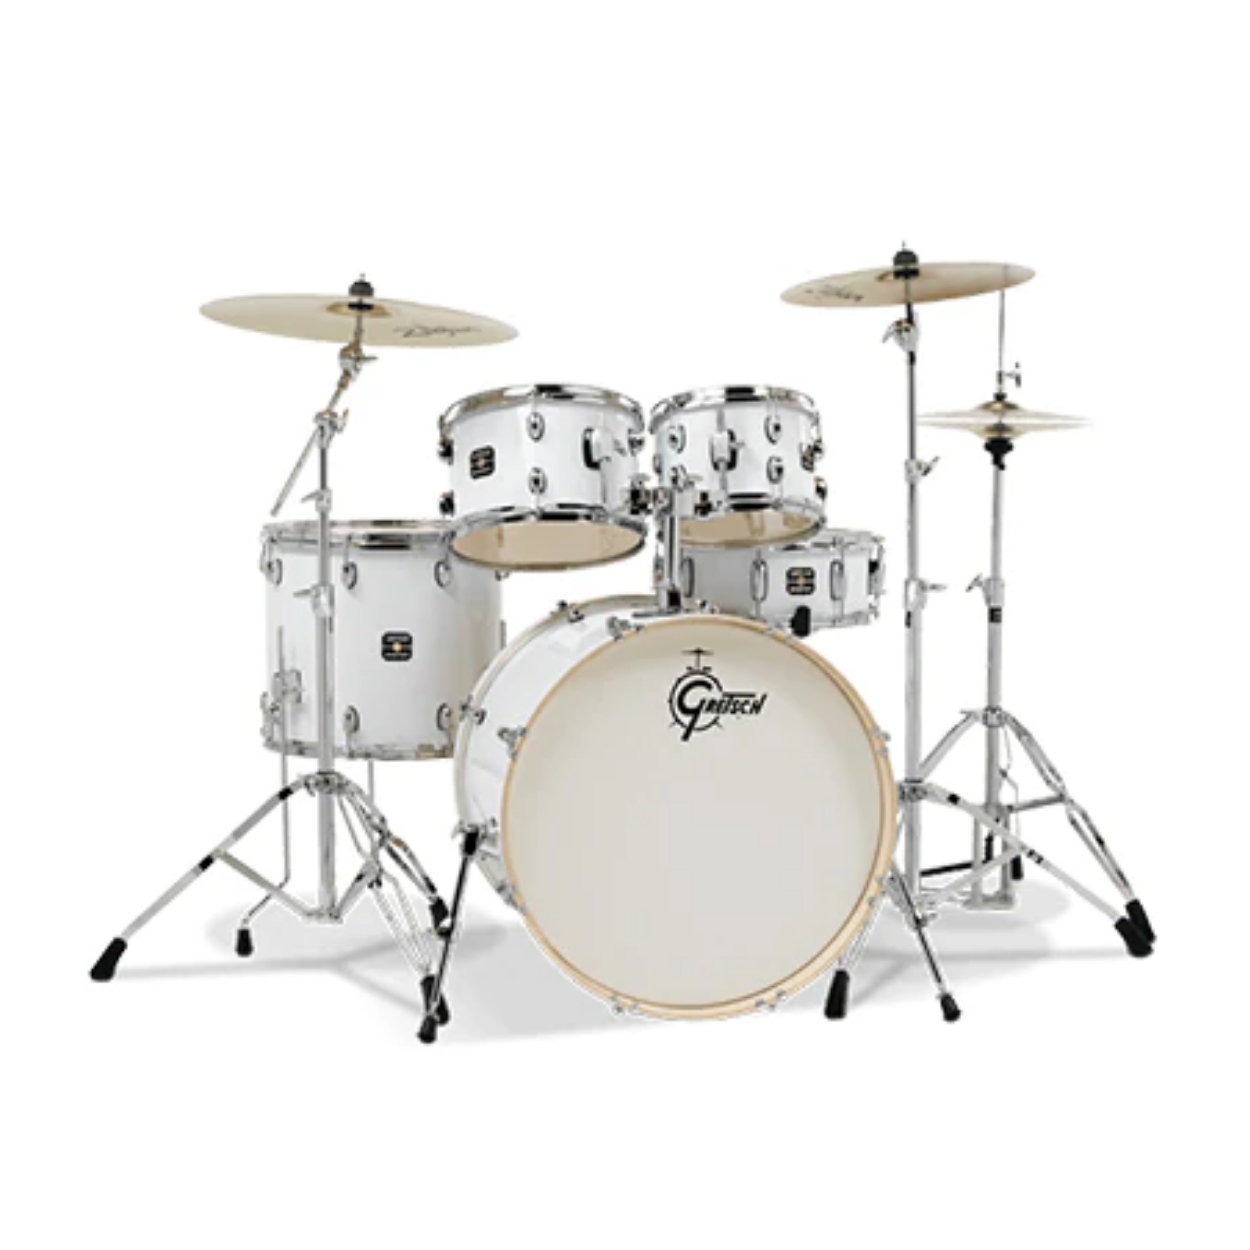 Gretsch GE4E825W Energy 5-Piece Drum Kit with Hardware(22inch BD), No Cymbals, White